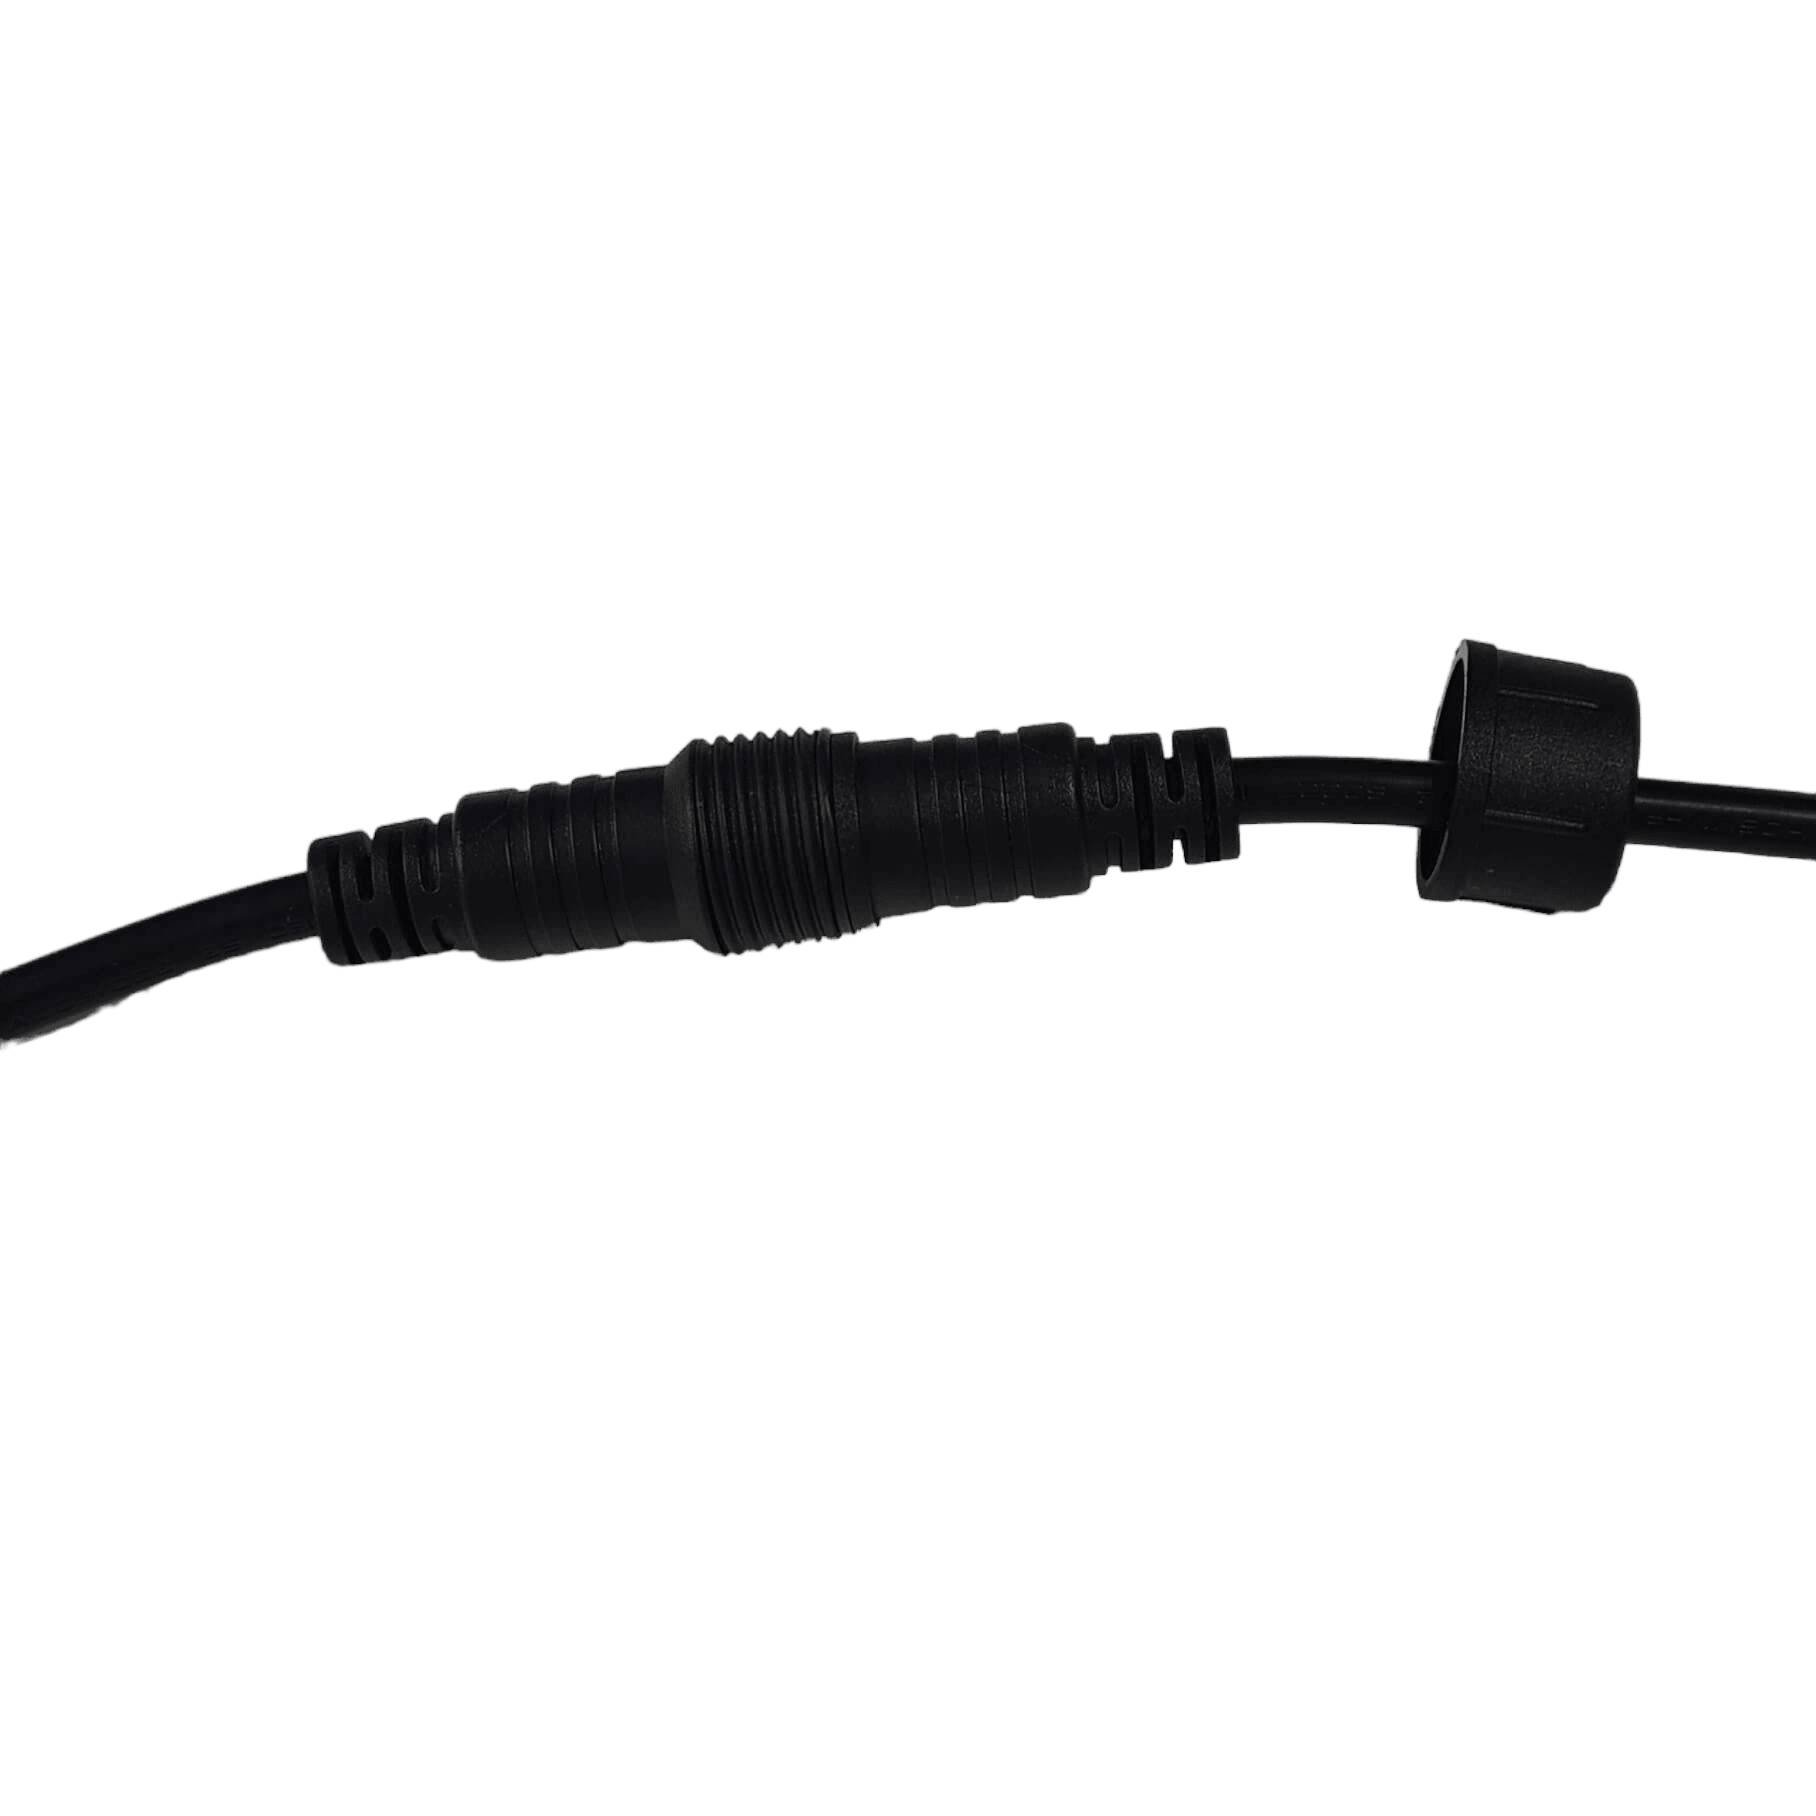 3 Metre Extension Cable For Heavy Duty Waterproof Outdoor String Lights - 3M - Lighting Legends